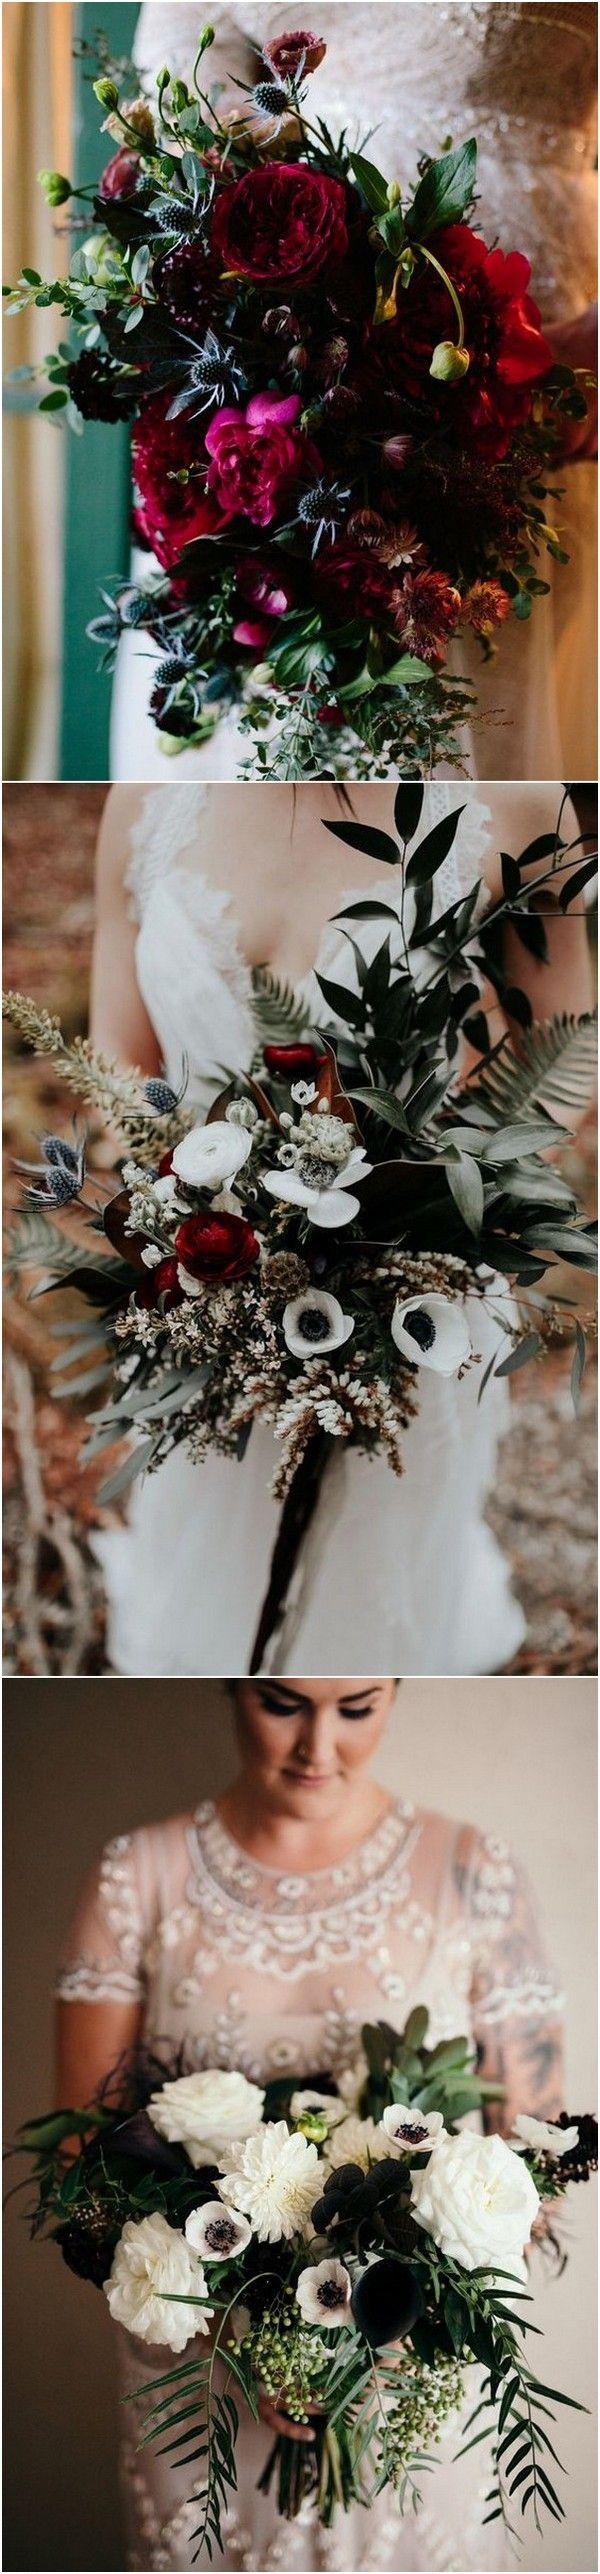 Wedding - Top 25 Moody Wedding Bouquets For 2018 Trends - Page 2 Of 3